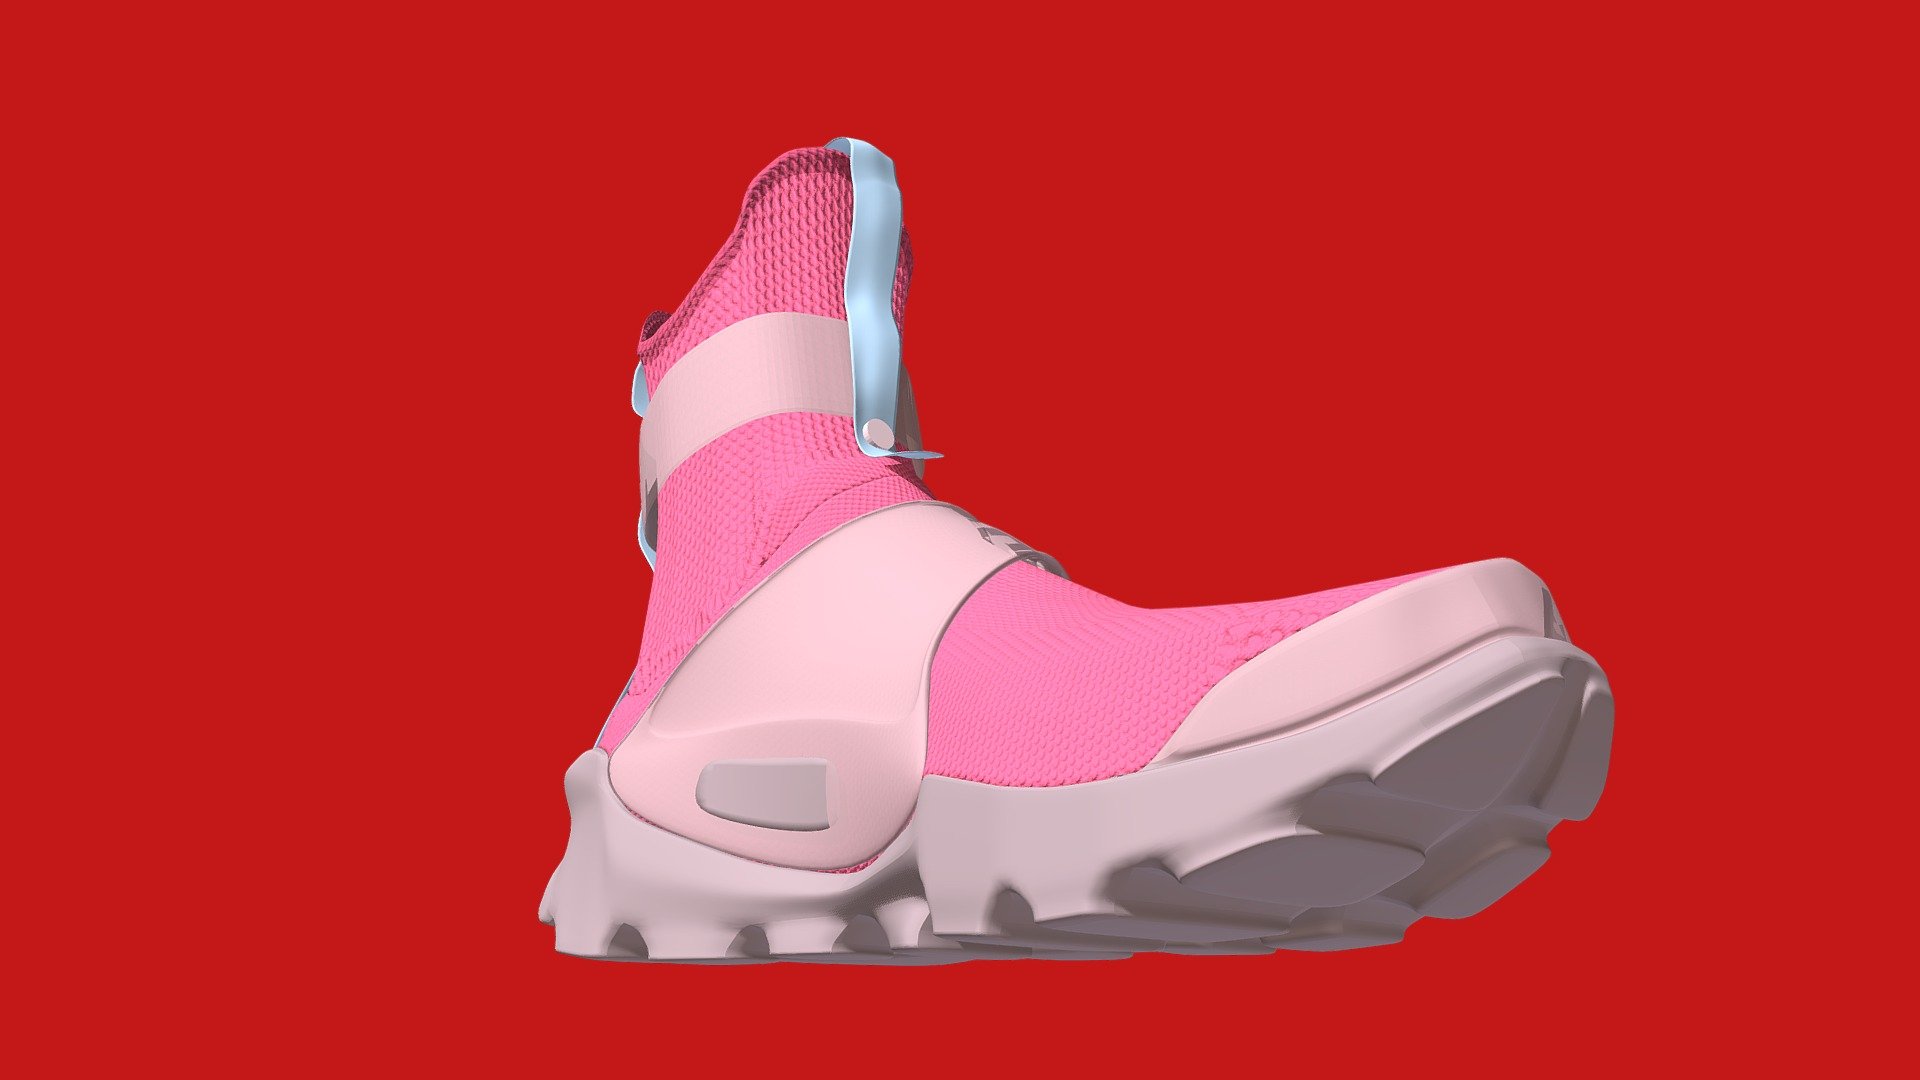 Experimenting legendary Nike Sock Dart with high upper for unique look 3d model